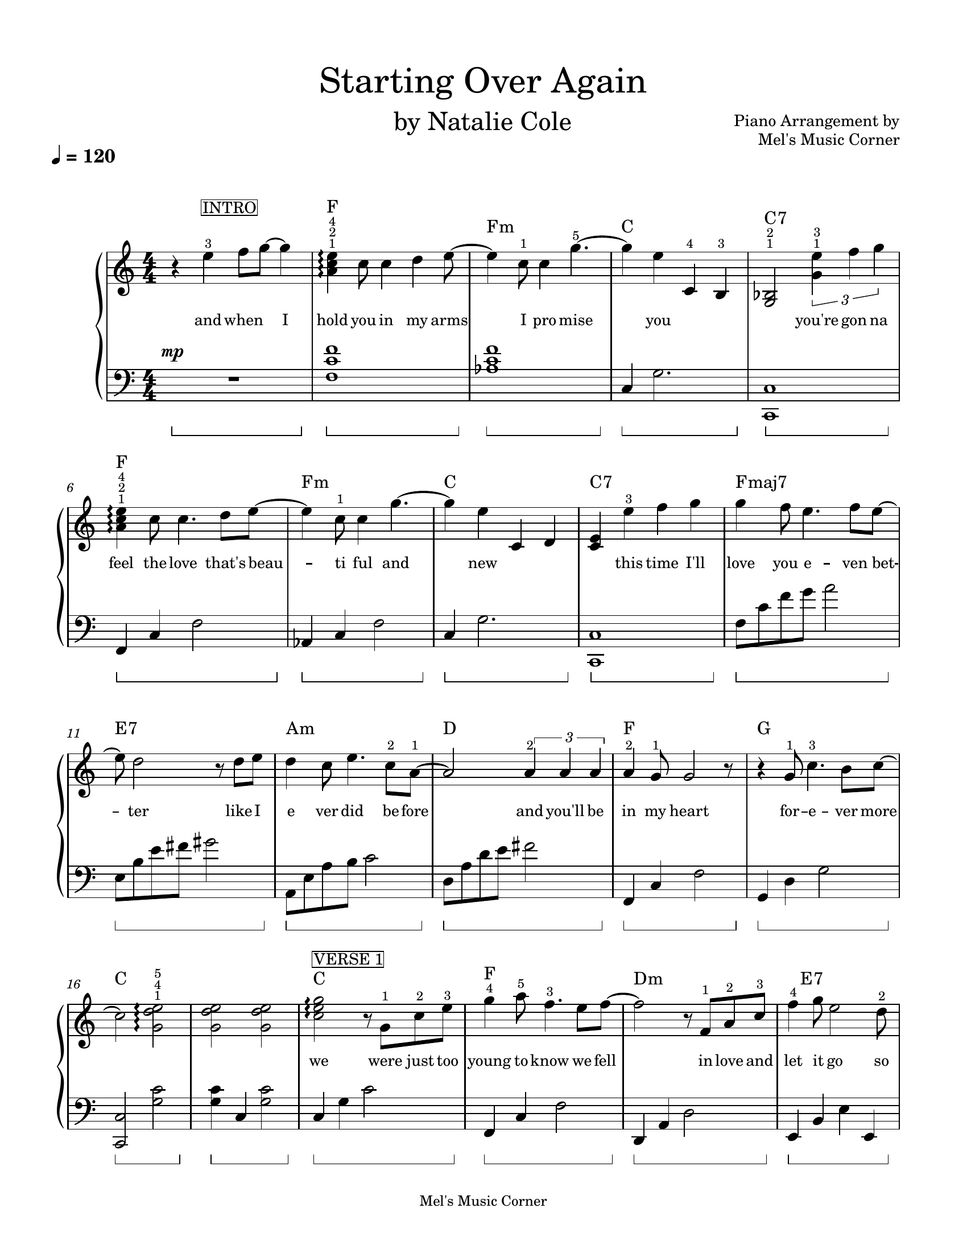 Natalie Cole - Starting Over Again (piano sheet music) by Mel's Music Corner